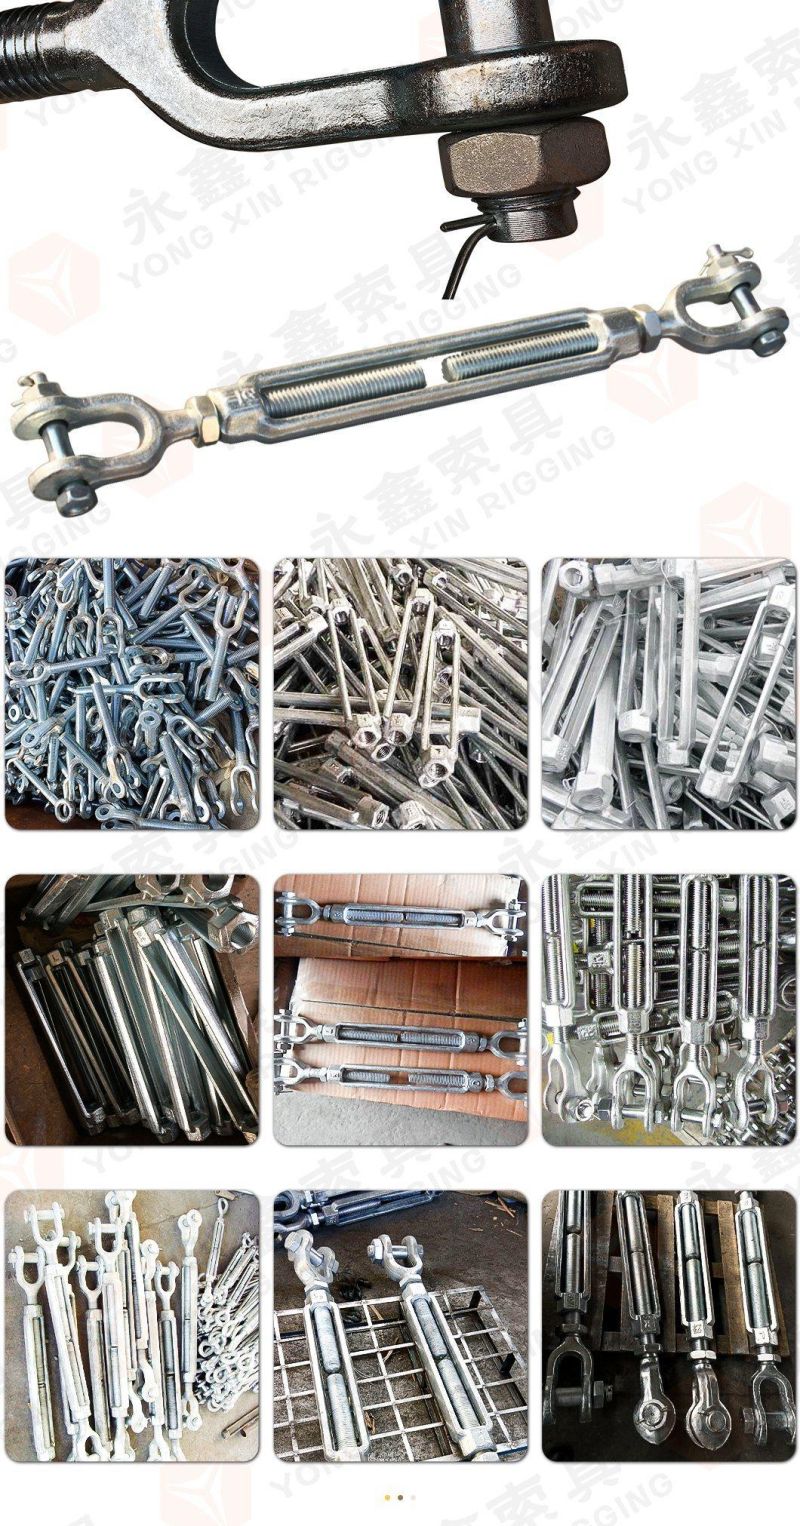 Jaw&Jaw Stainless Steel Turnbuckle Us Style Open Body for Sailing Boat